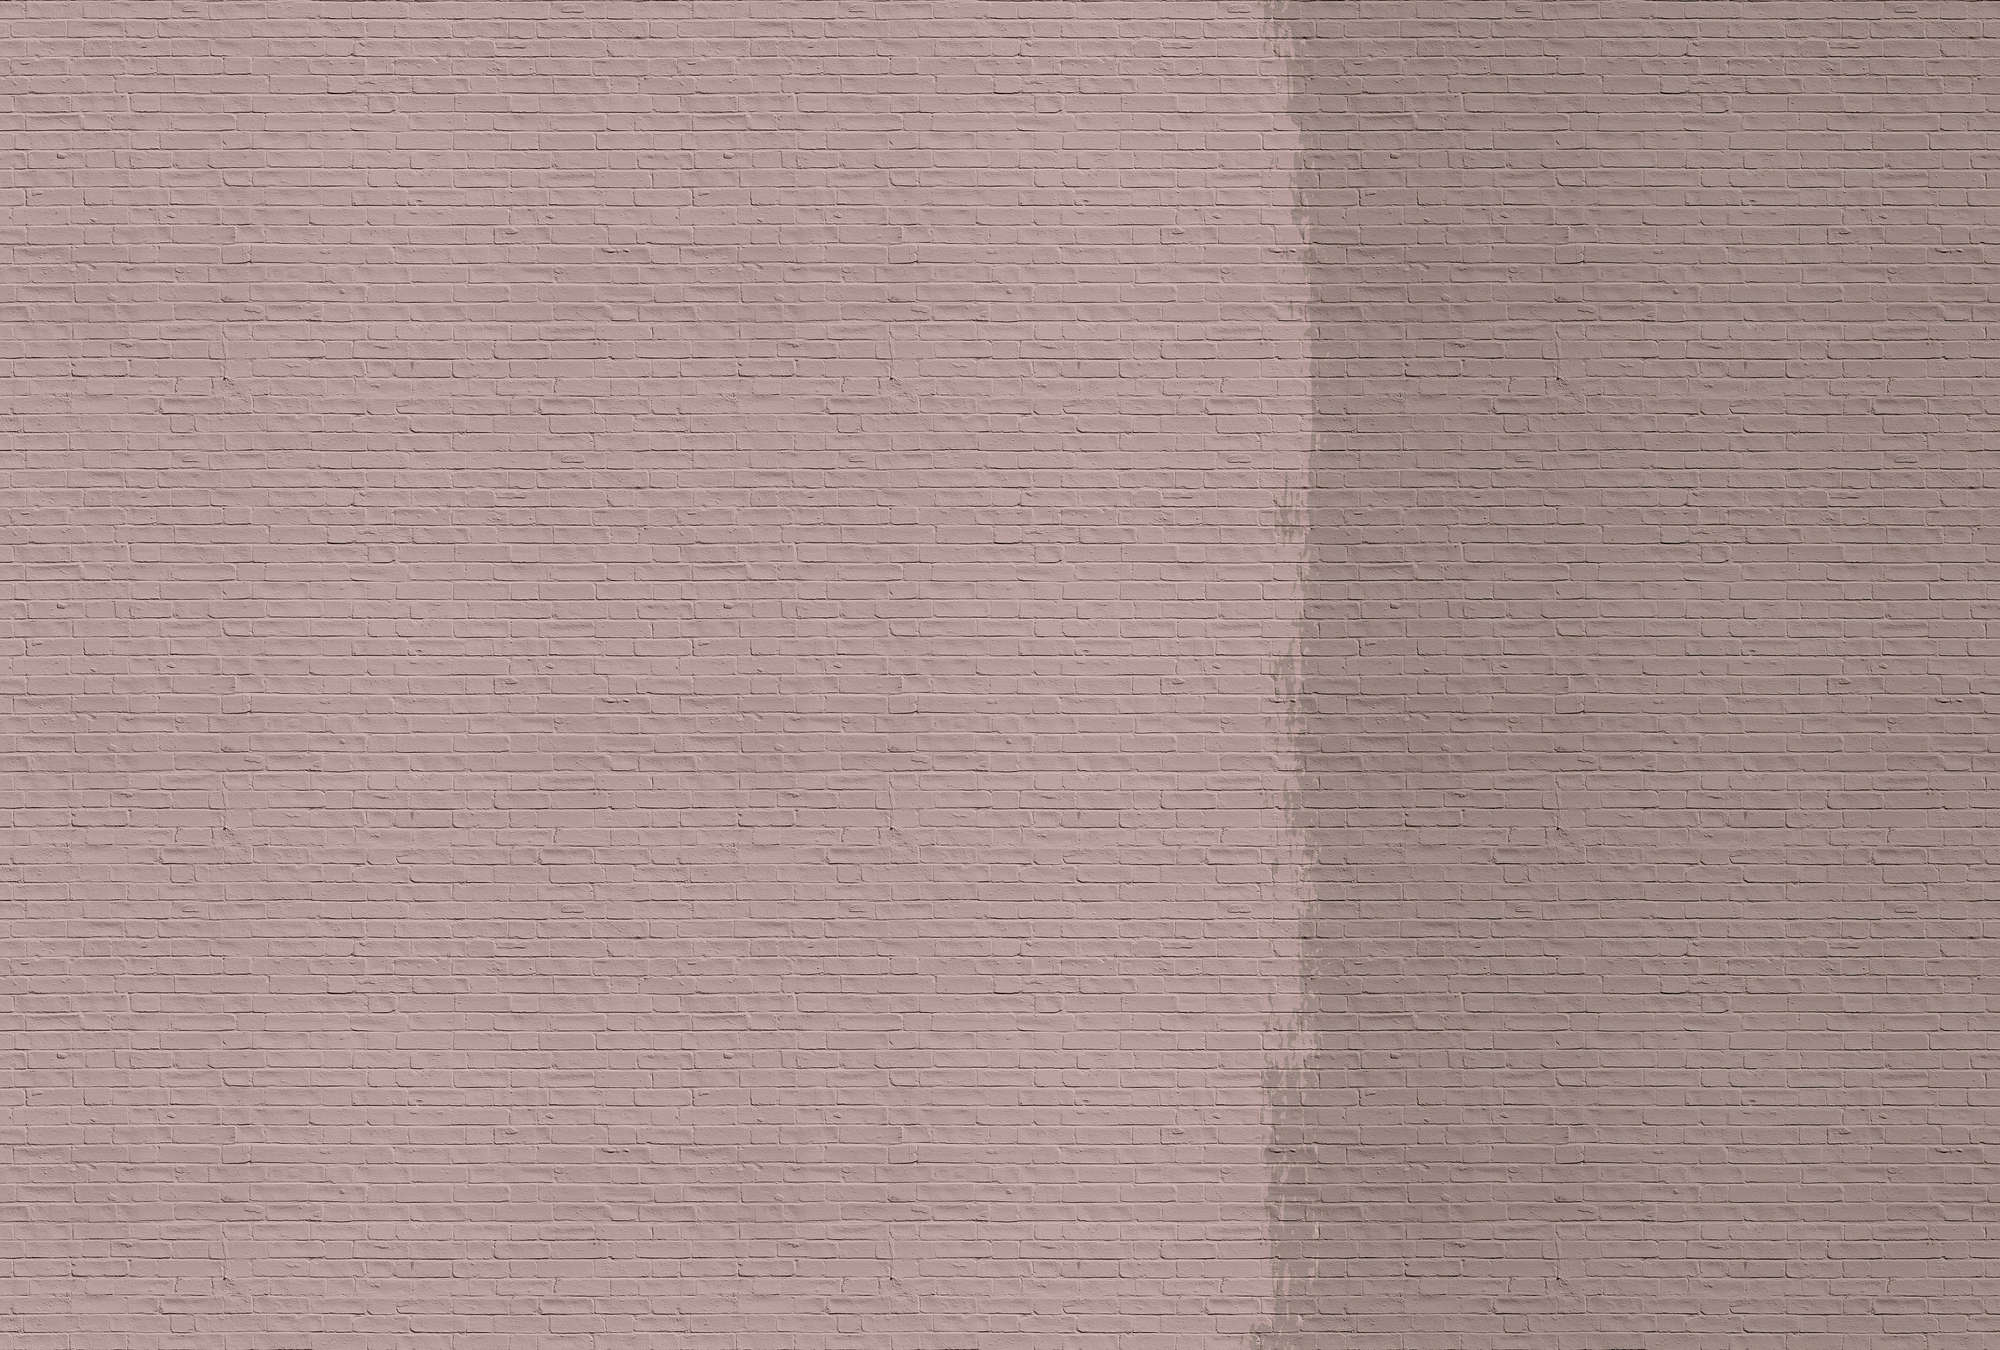             Tainted love 2 - Painted brick wall mural - Pink, Taupe | Pearl smooth non-woven
        